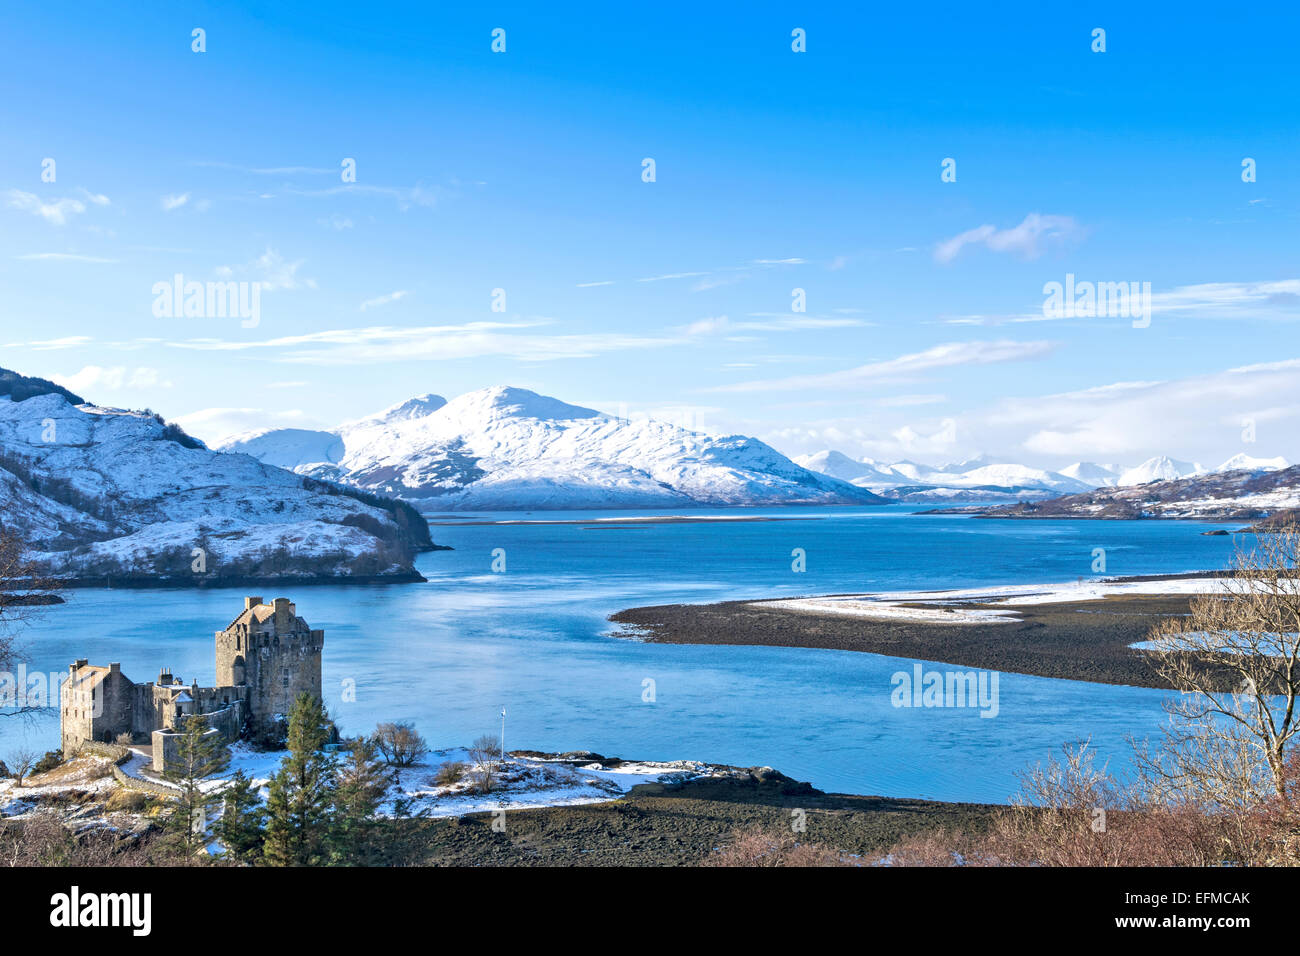 EILEAN DONAN CASTLE AND LOCH DUICH WITH A HEAVY FALL OF SNOW ON THE CUILLIN MOUNTAINS Stock Photo